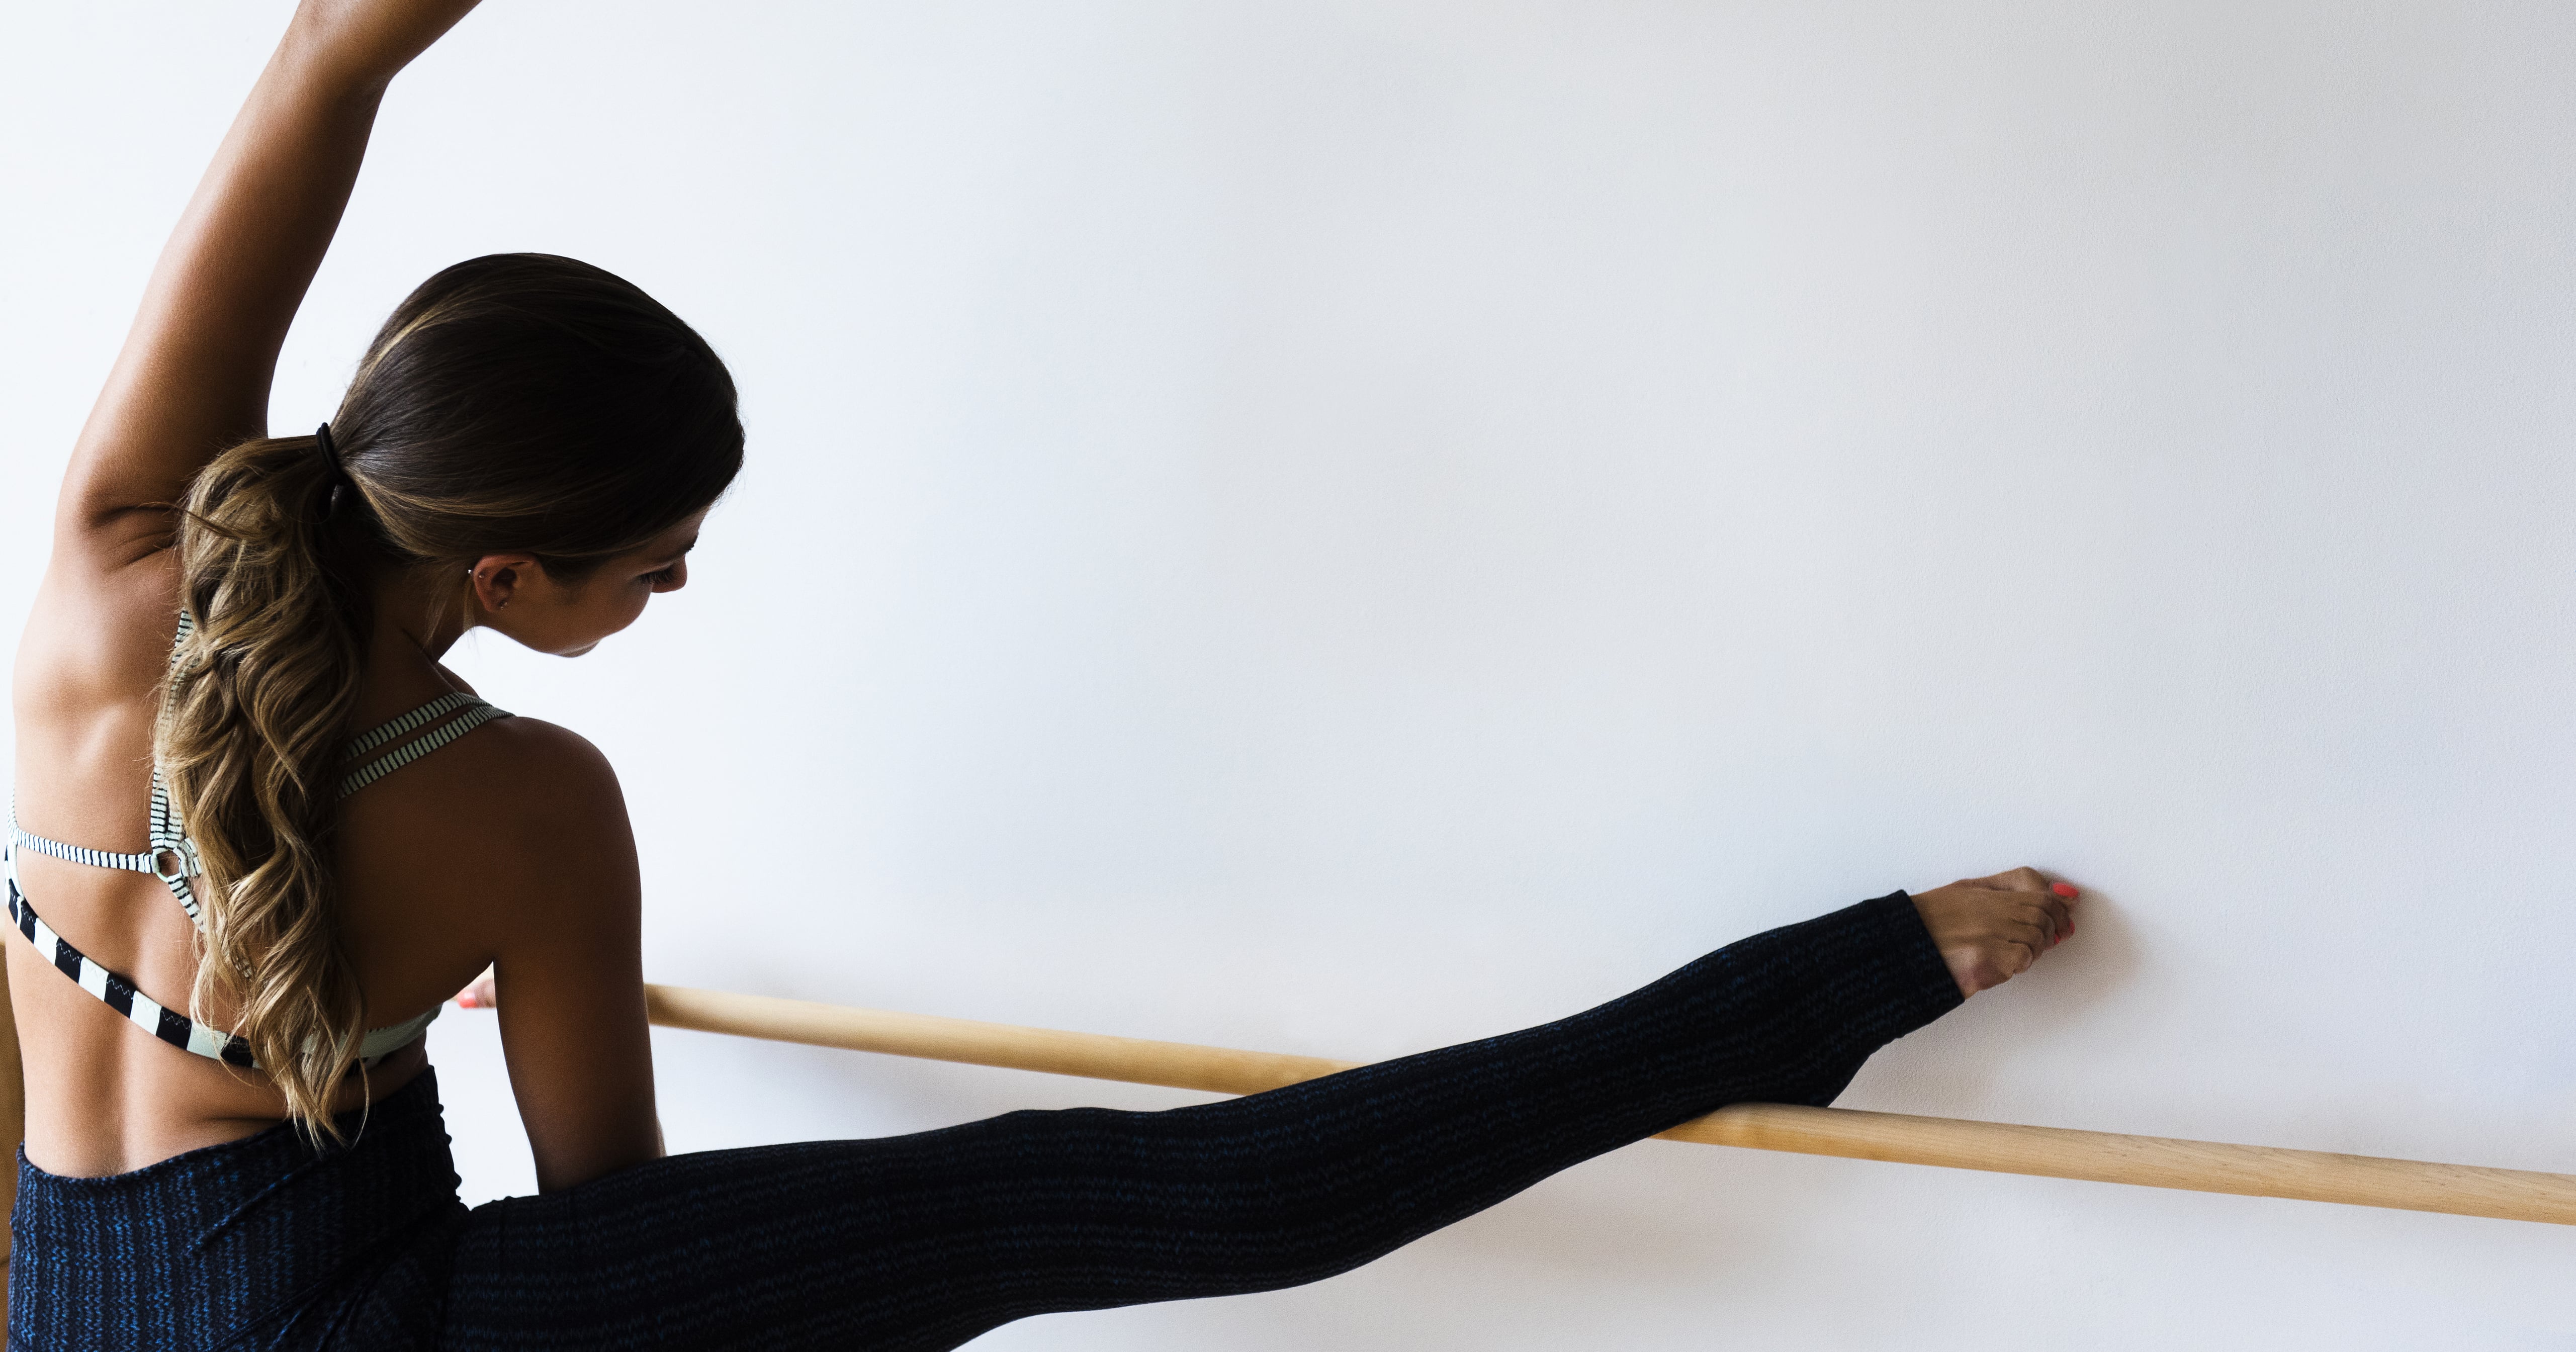 What is barre - Ballet barre workouts guide